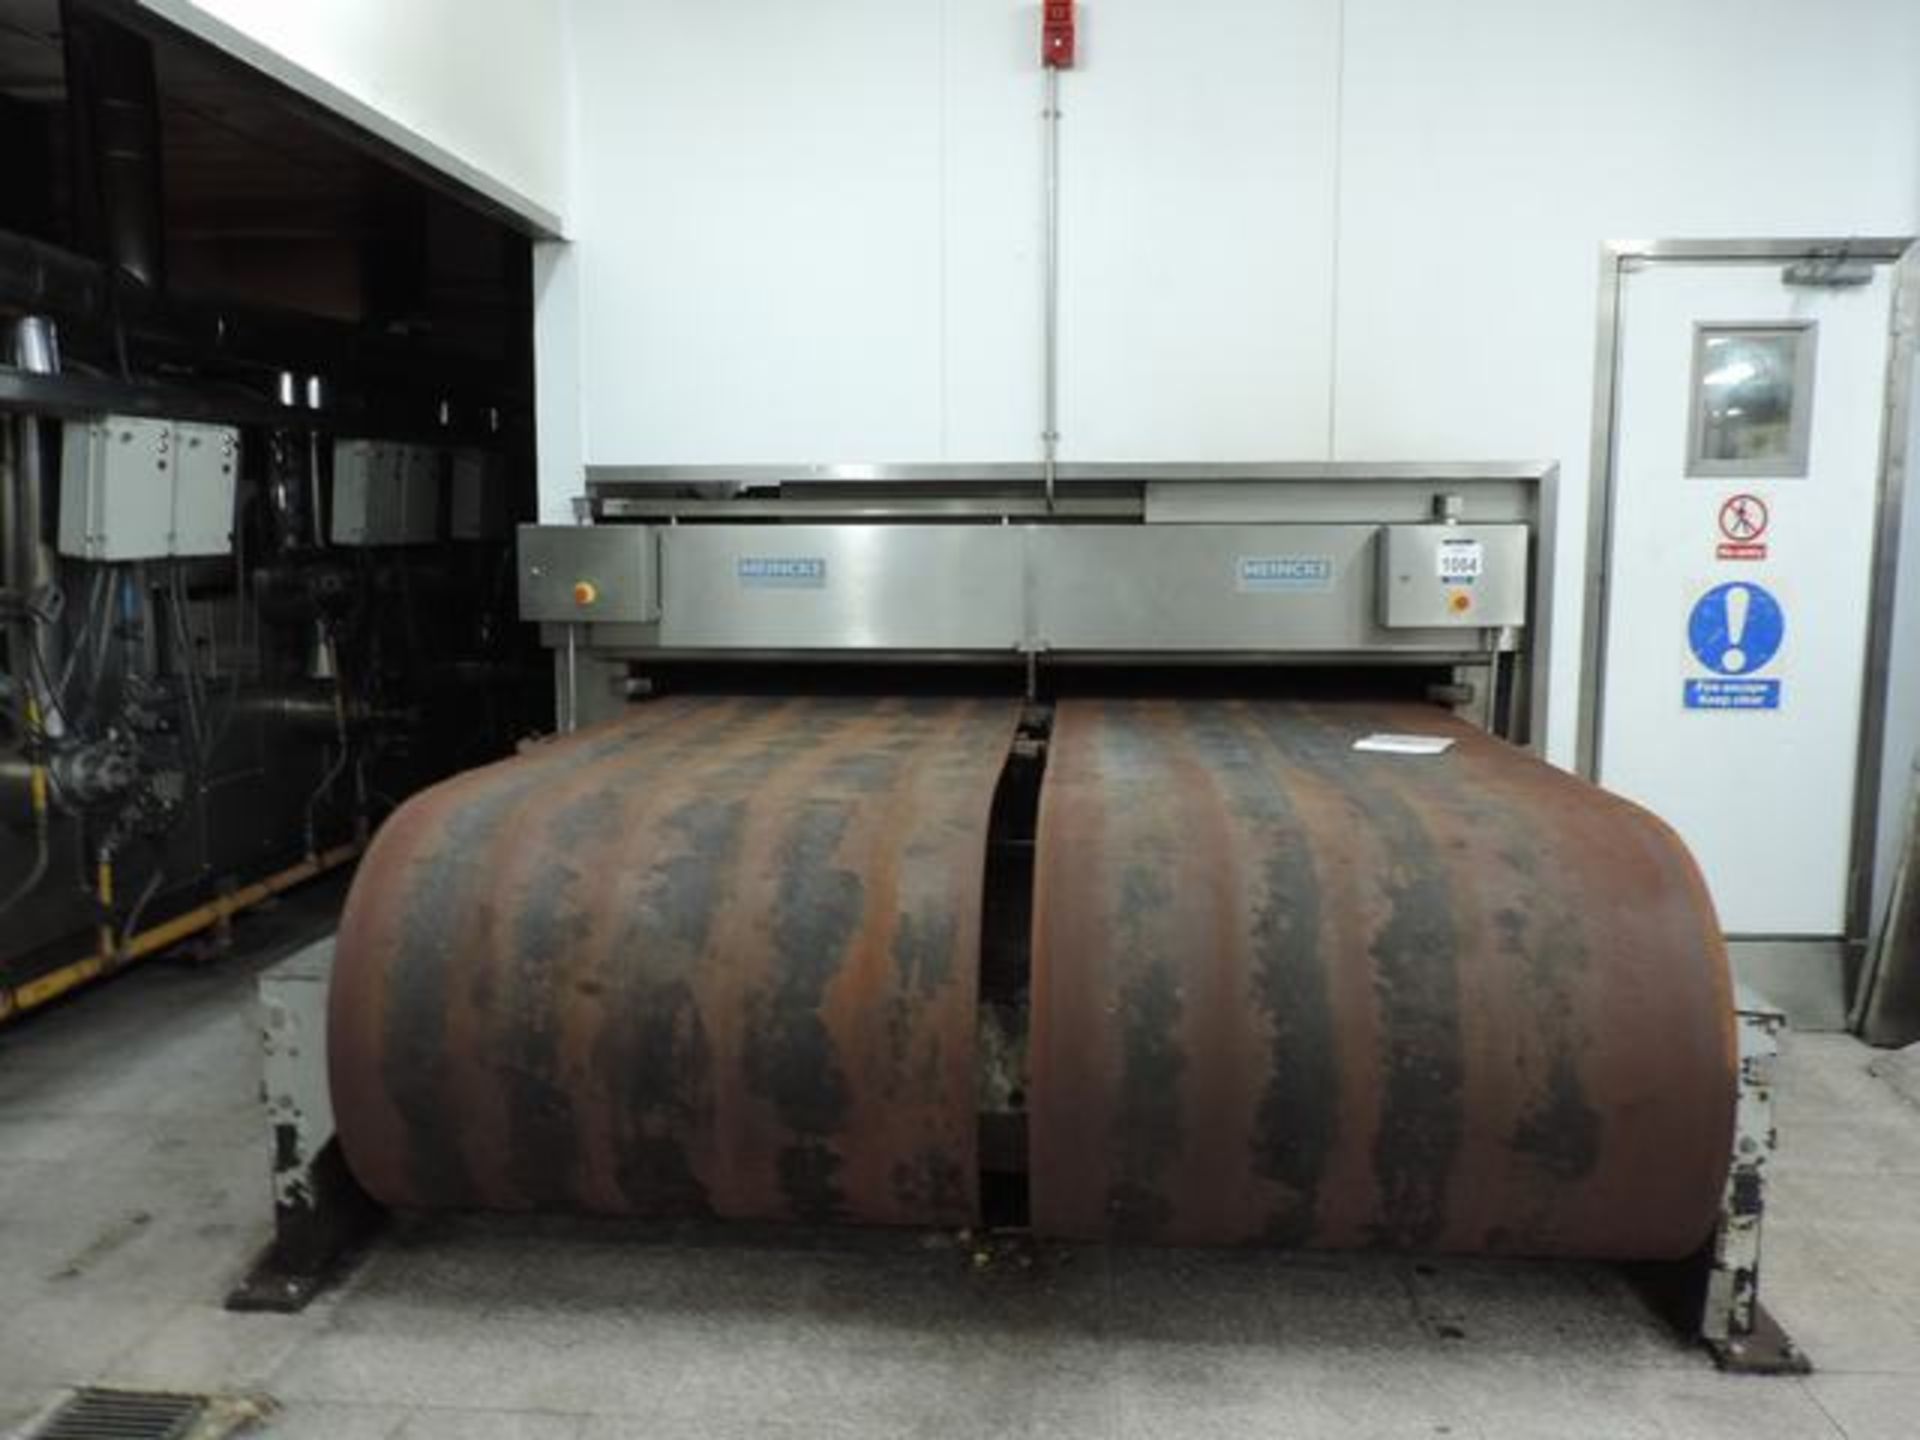 Meincke dual band oven, stainless construction, 6-zone gas fired, approx 31.5 m long, with (2)